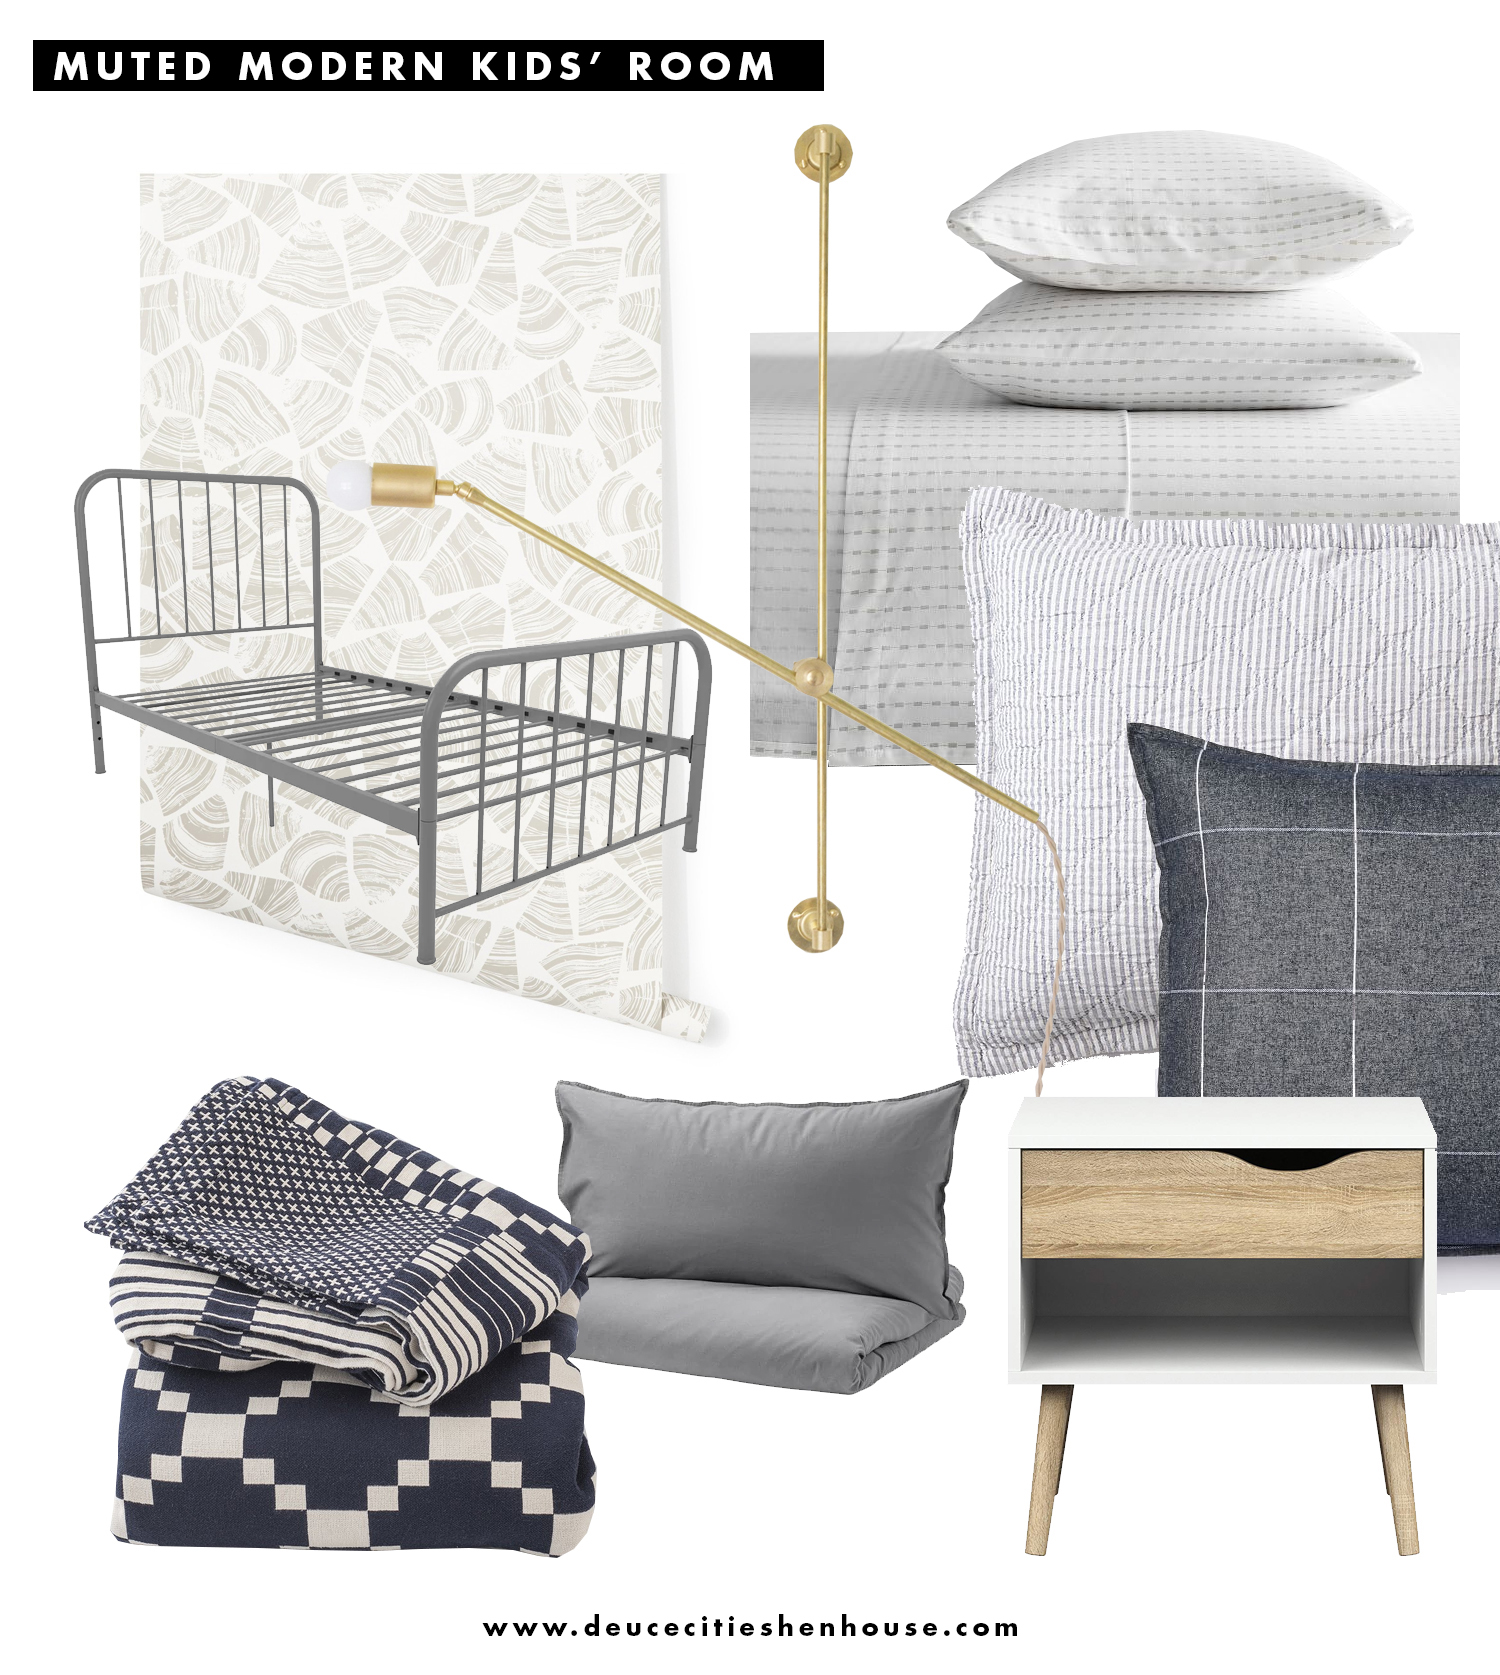 A Plan for The Kids' Shared Bedroom : Modern & Muted - Deuce Cities Henhouse